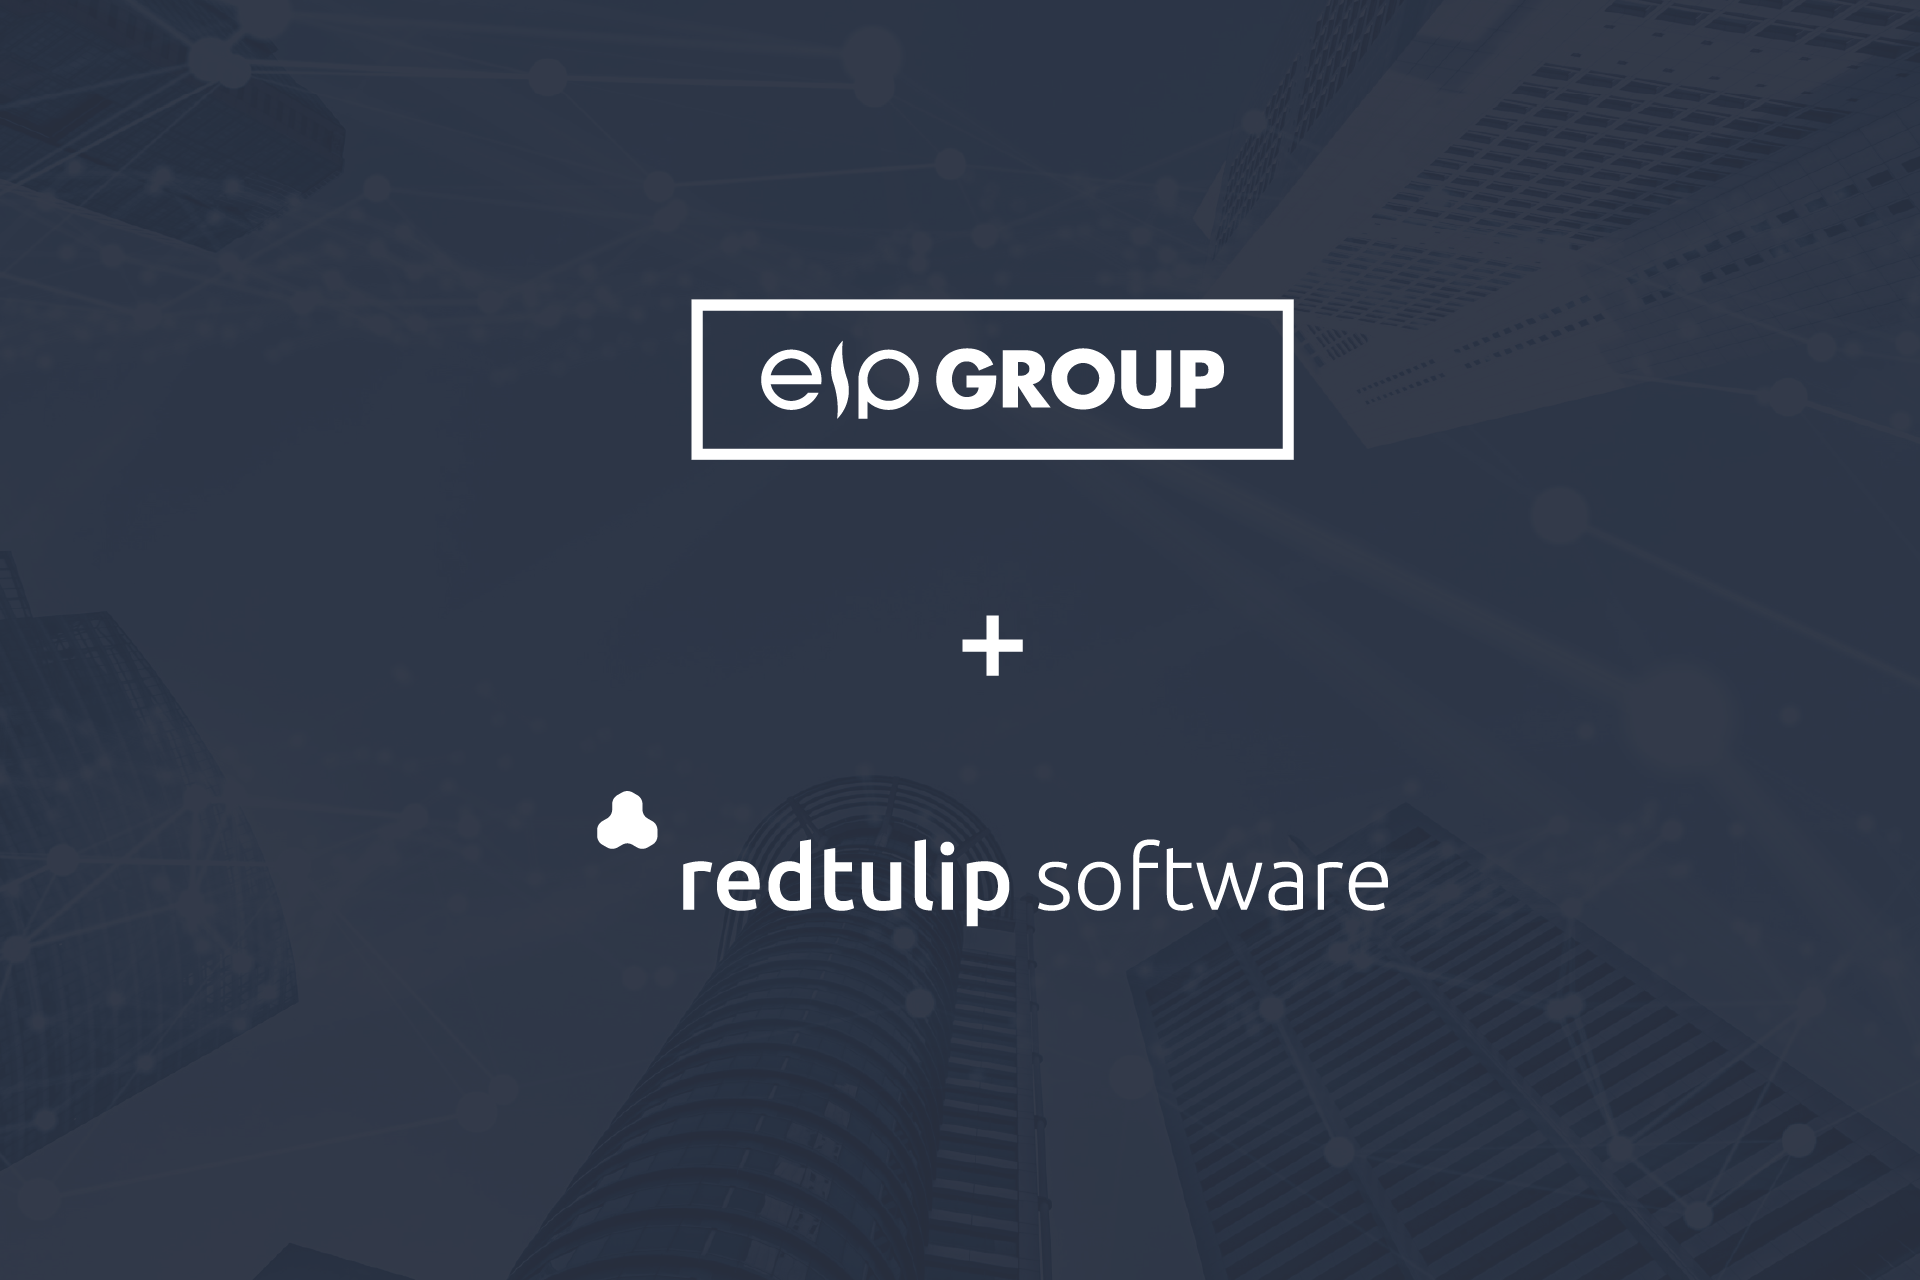 RedTulip Software becomes part of the EIP Group